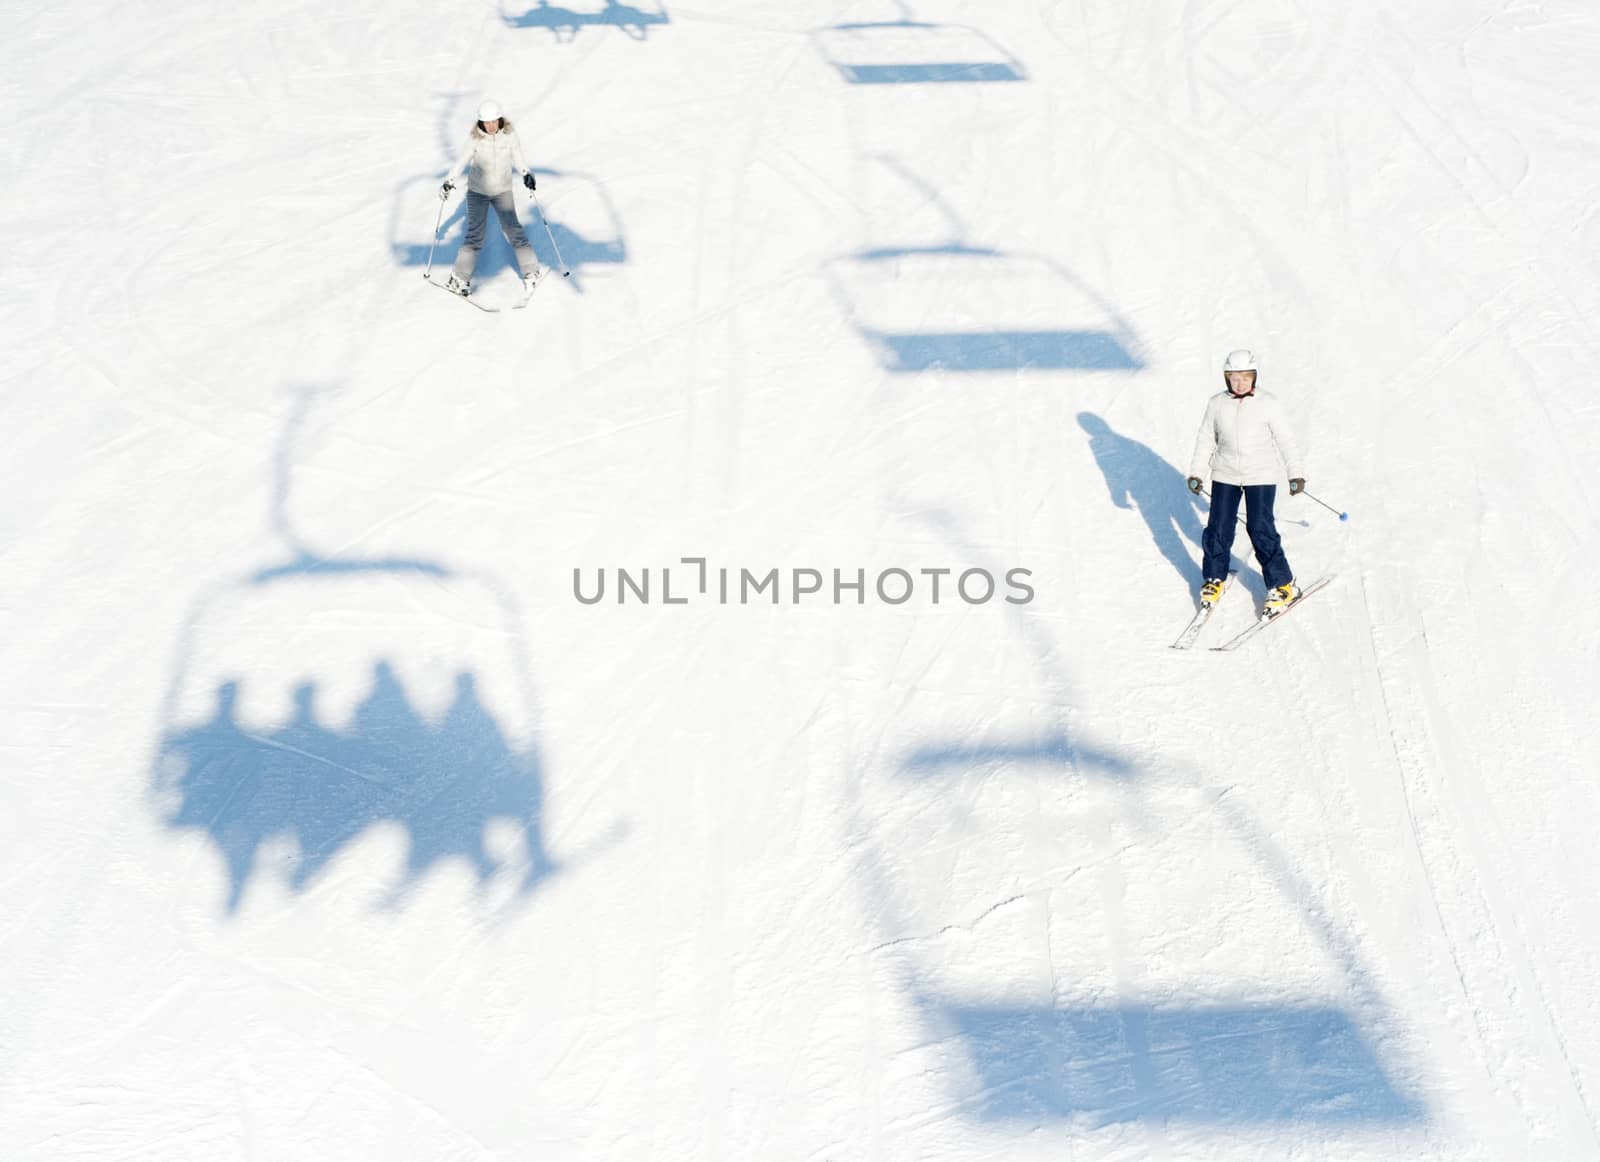 Bukovel, Ukraine - December 13, 2013: Skiers on a slope in Bukovel, Ukraine. Bukovel - is the largest ski resort in Ukraine. In 2012 it was named the most fast growing world ski resort.